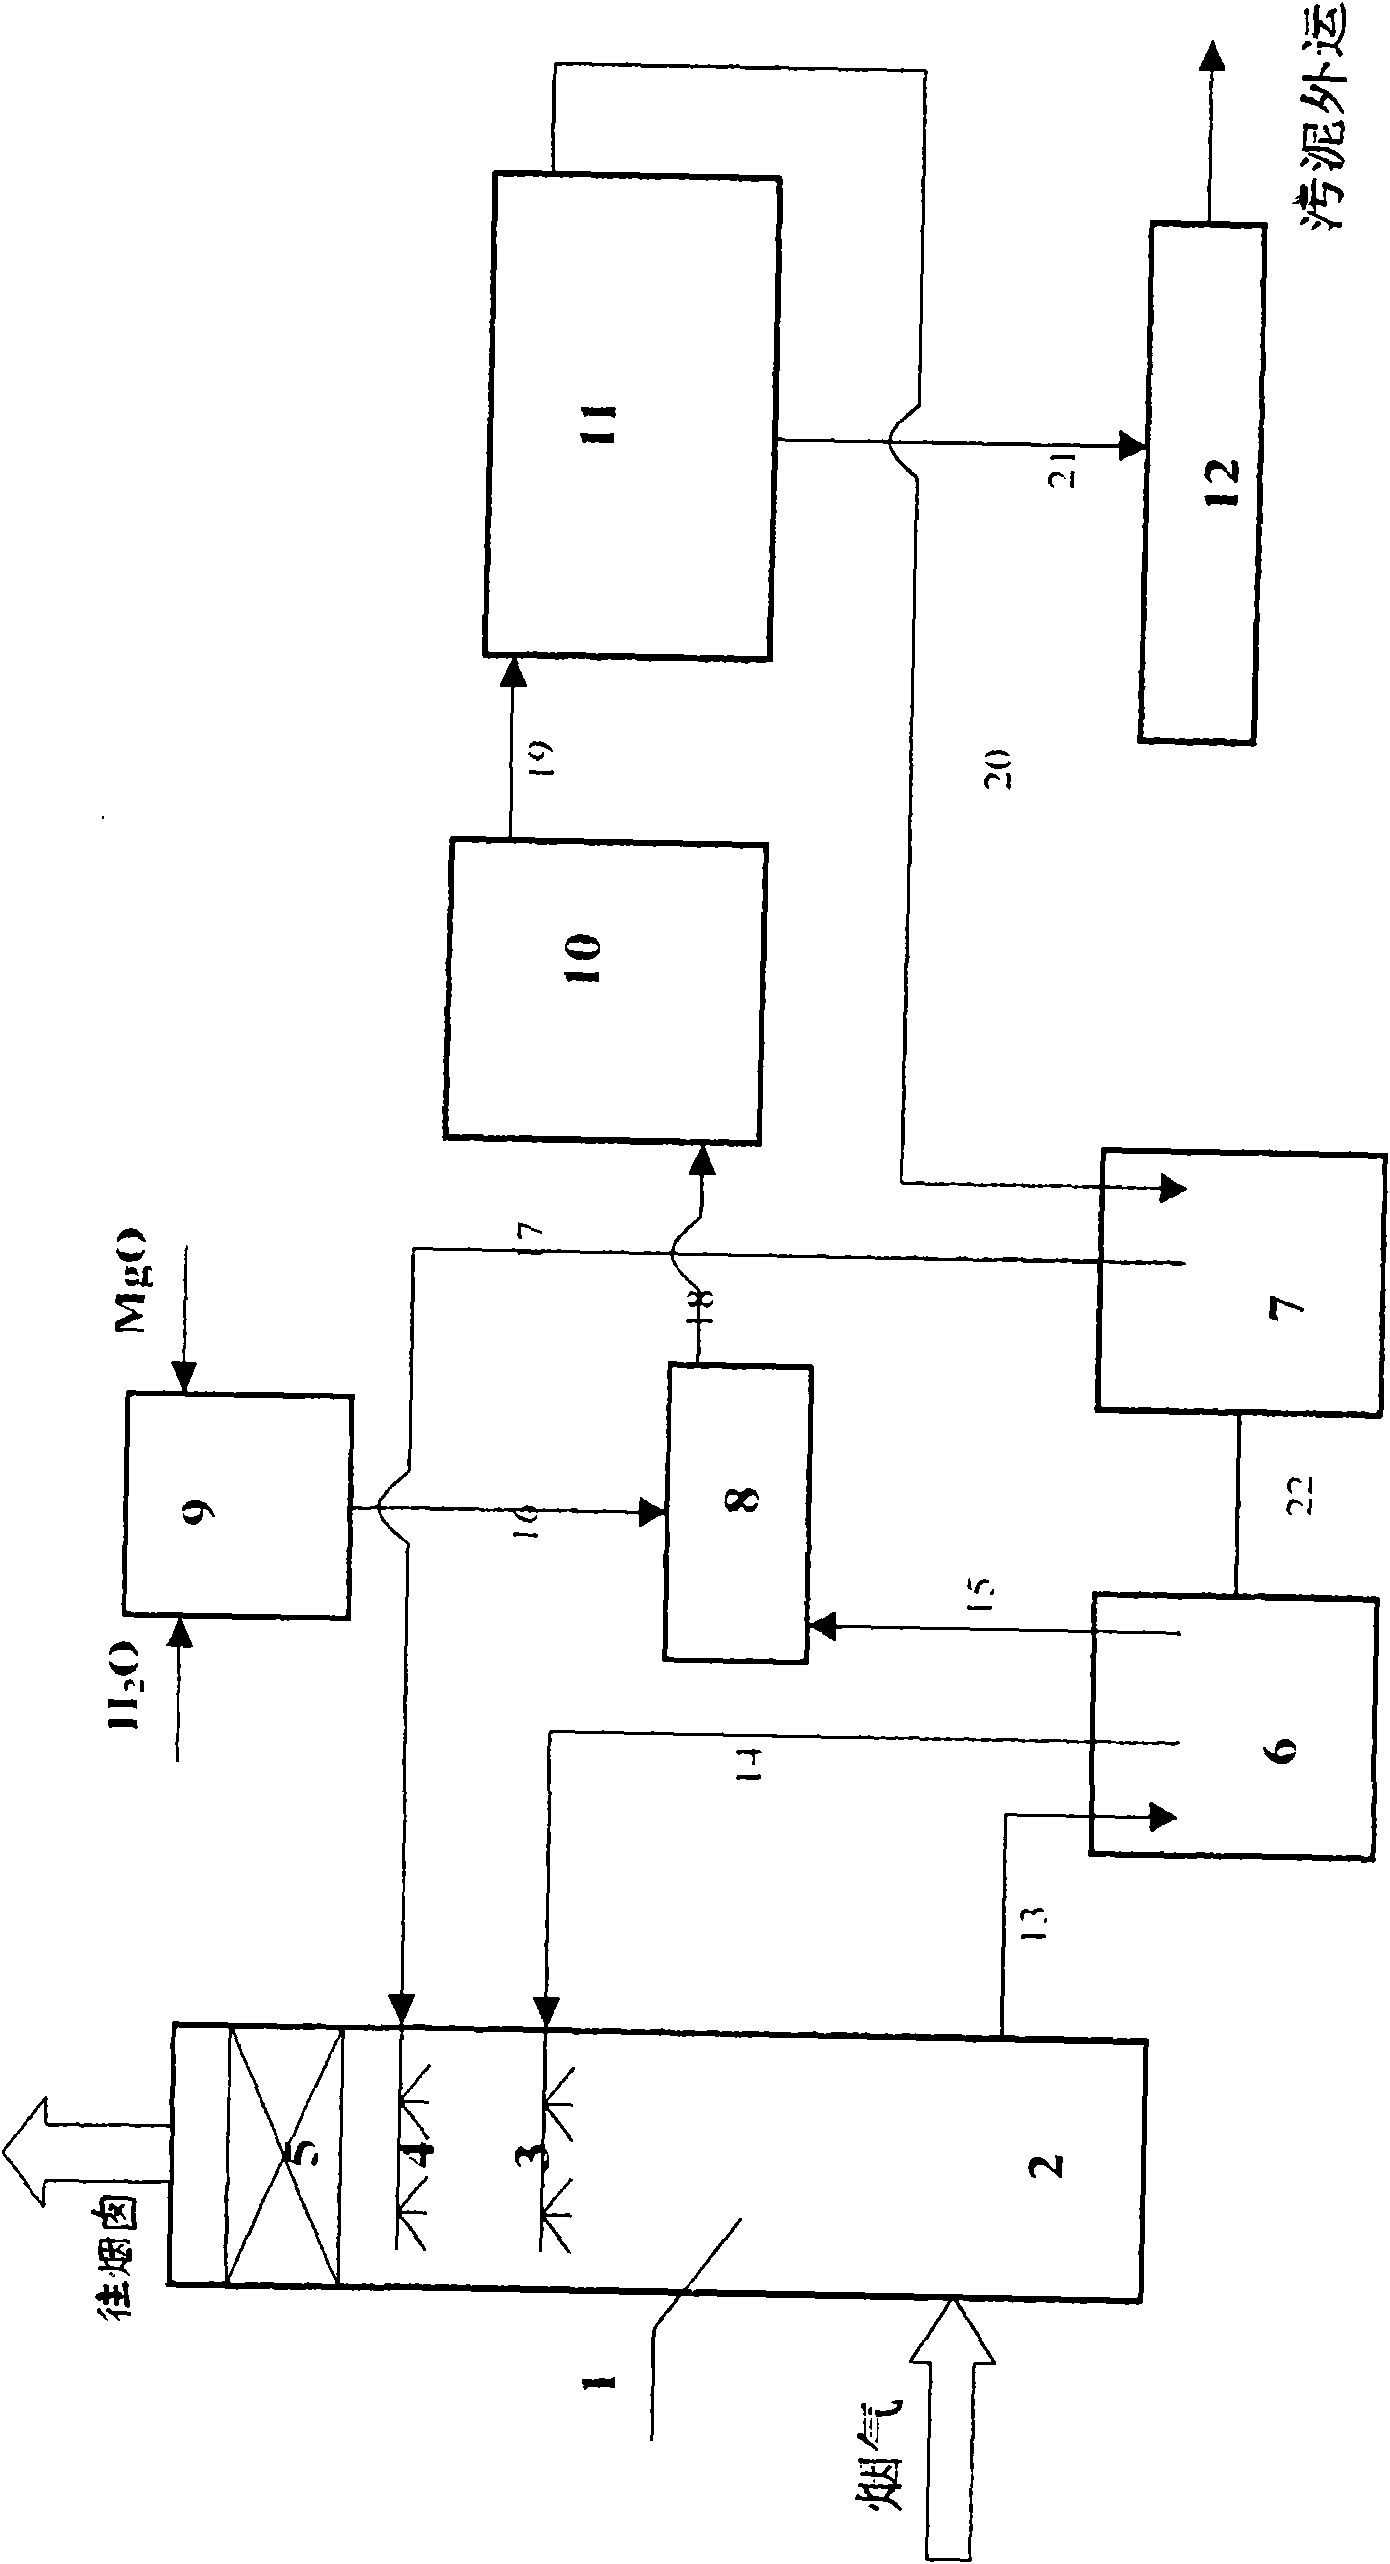 Desulfurization process of flue gas or waste gas by using external regenerative cycle magnesium sulfate method